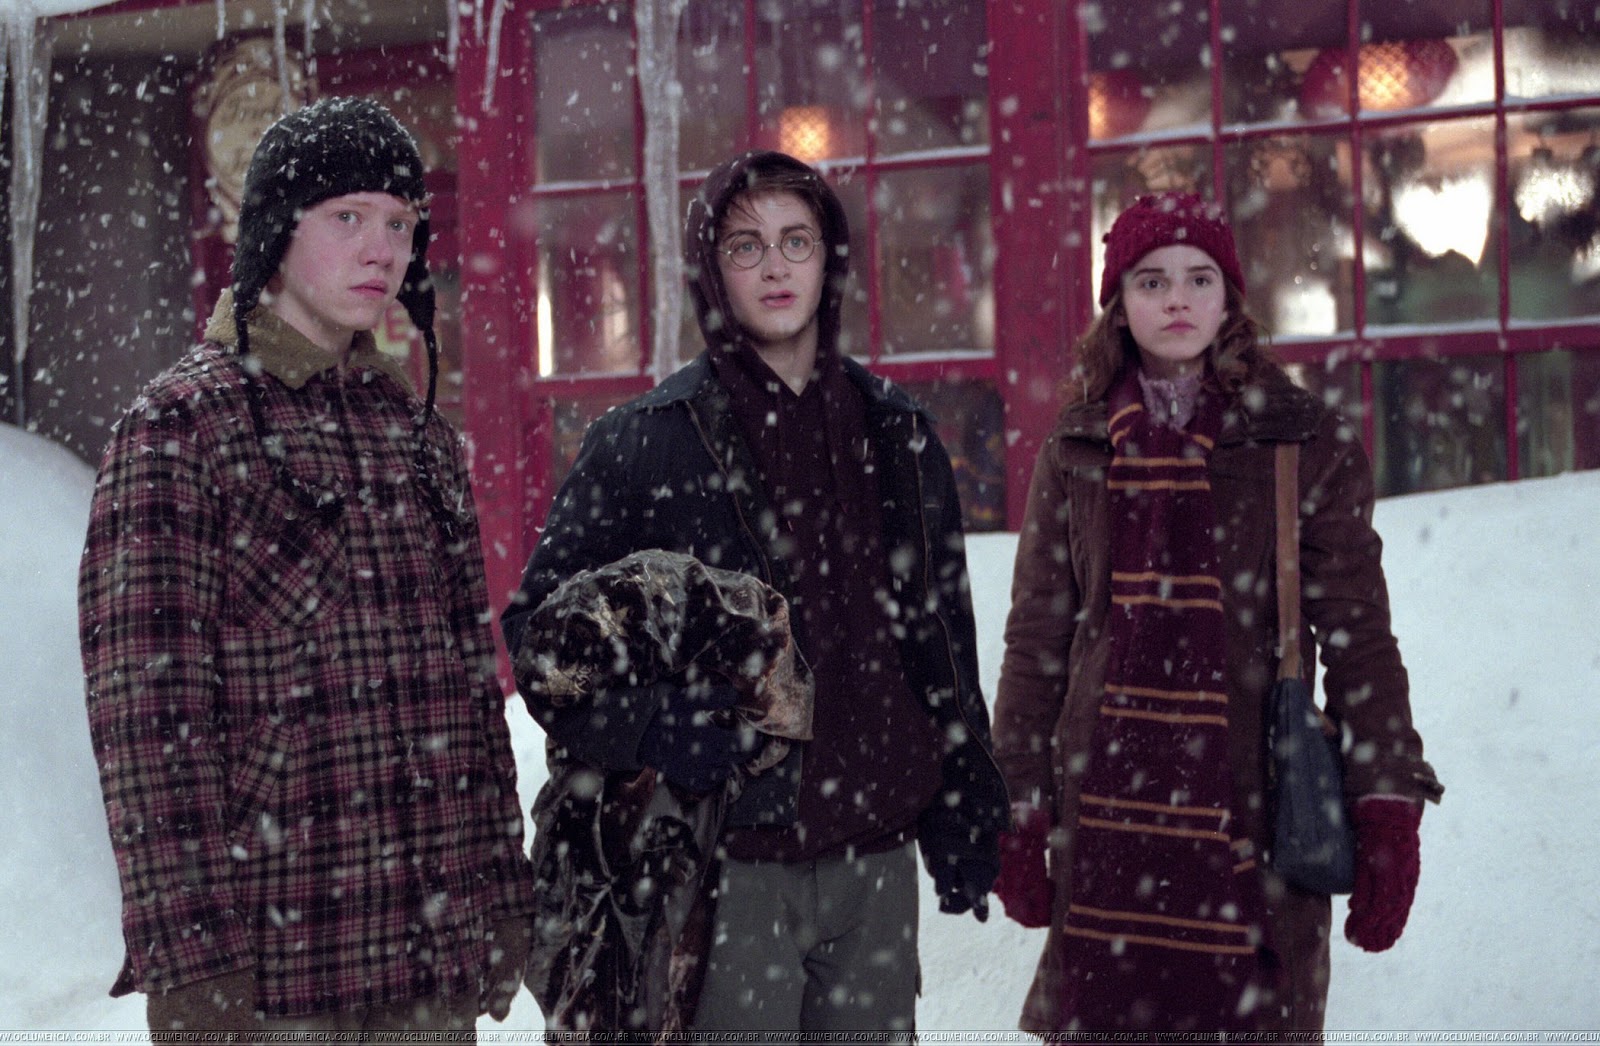 These Harry Potter Puffy Coats Will Keep You Magically Warm This Winter